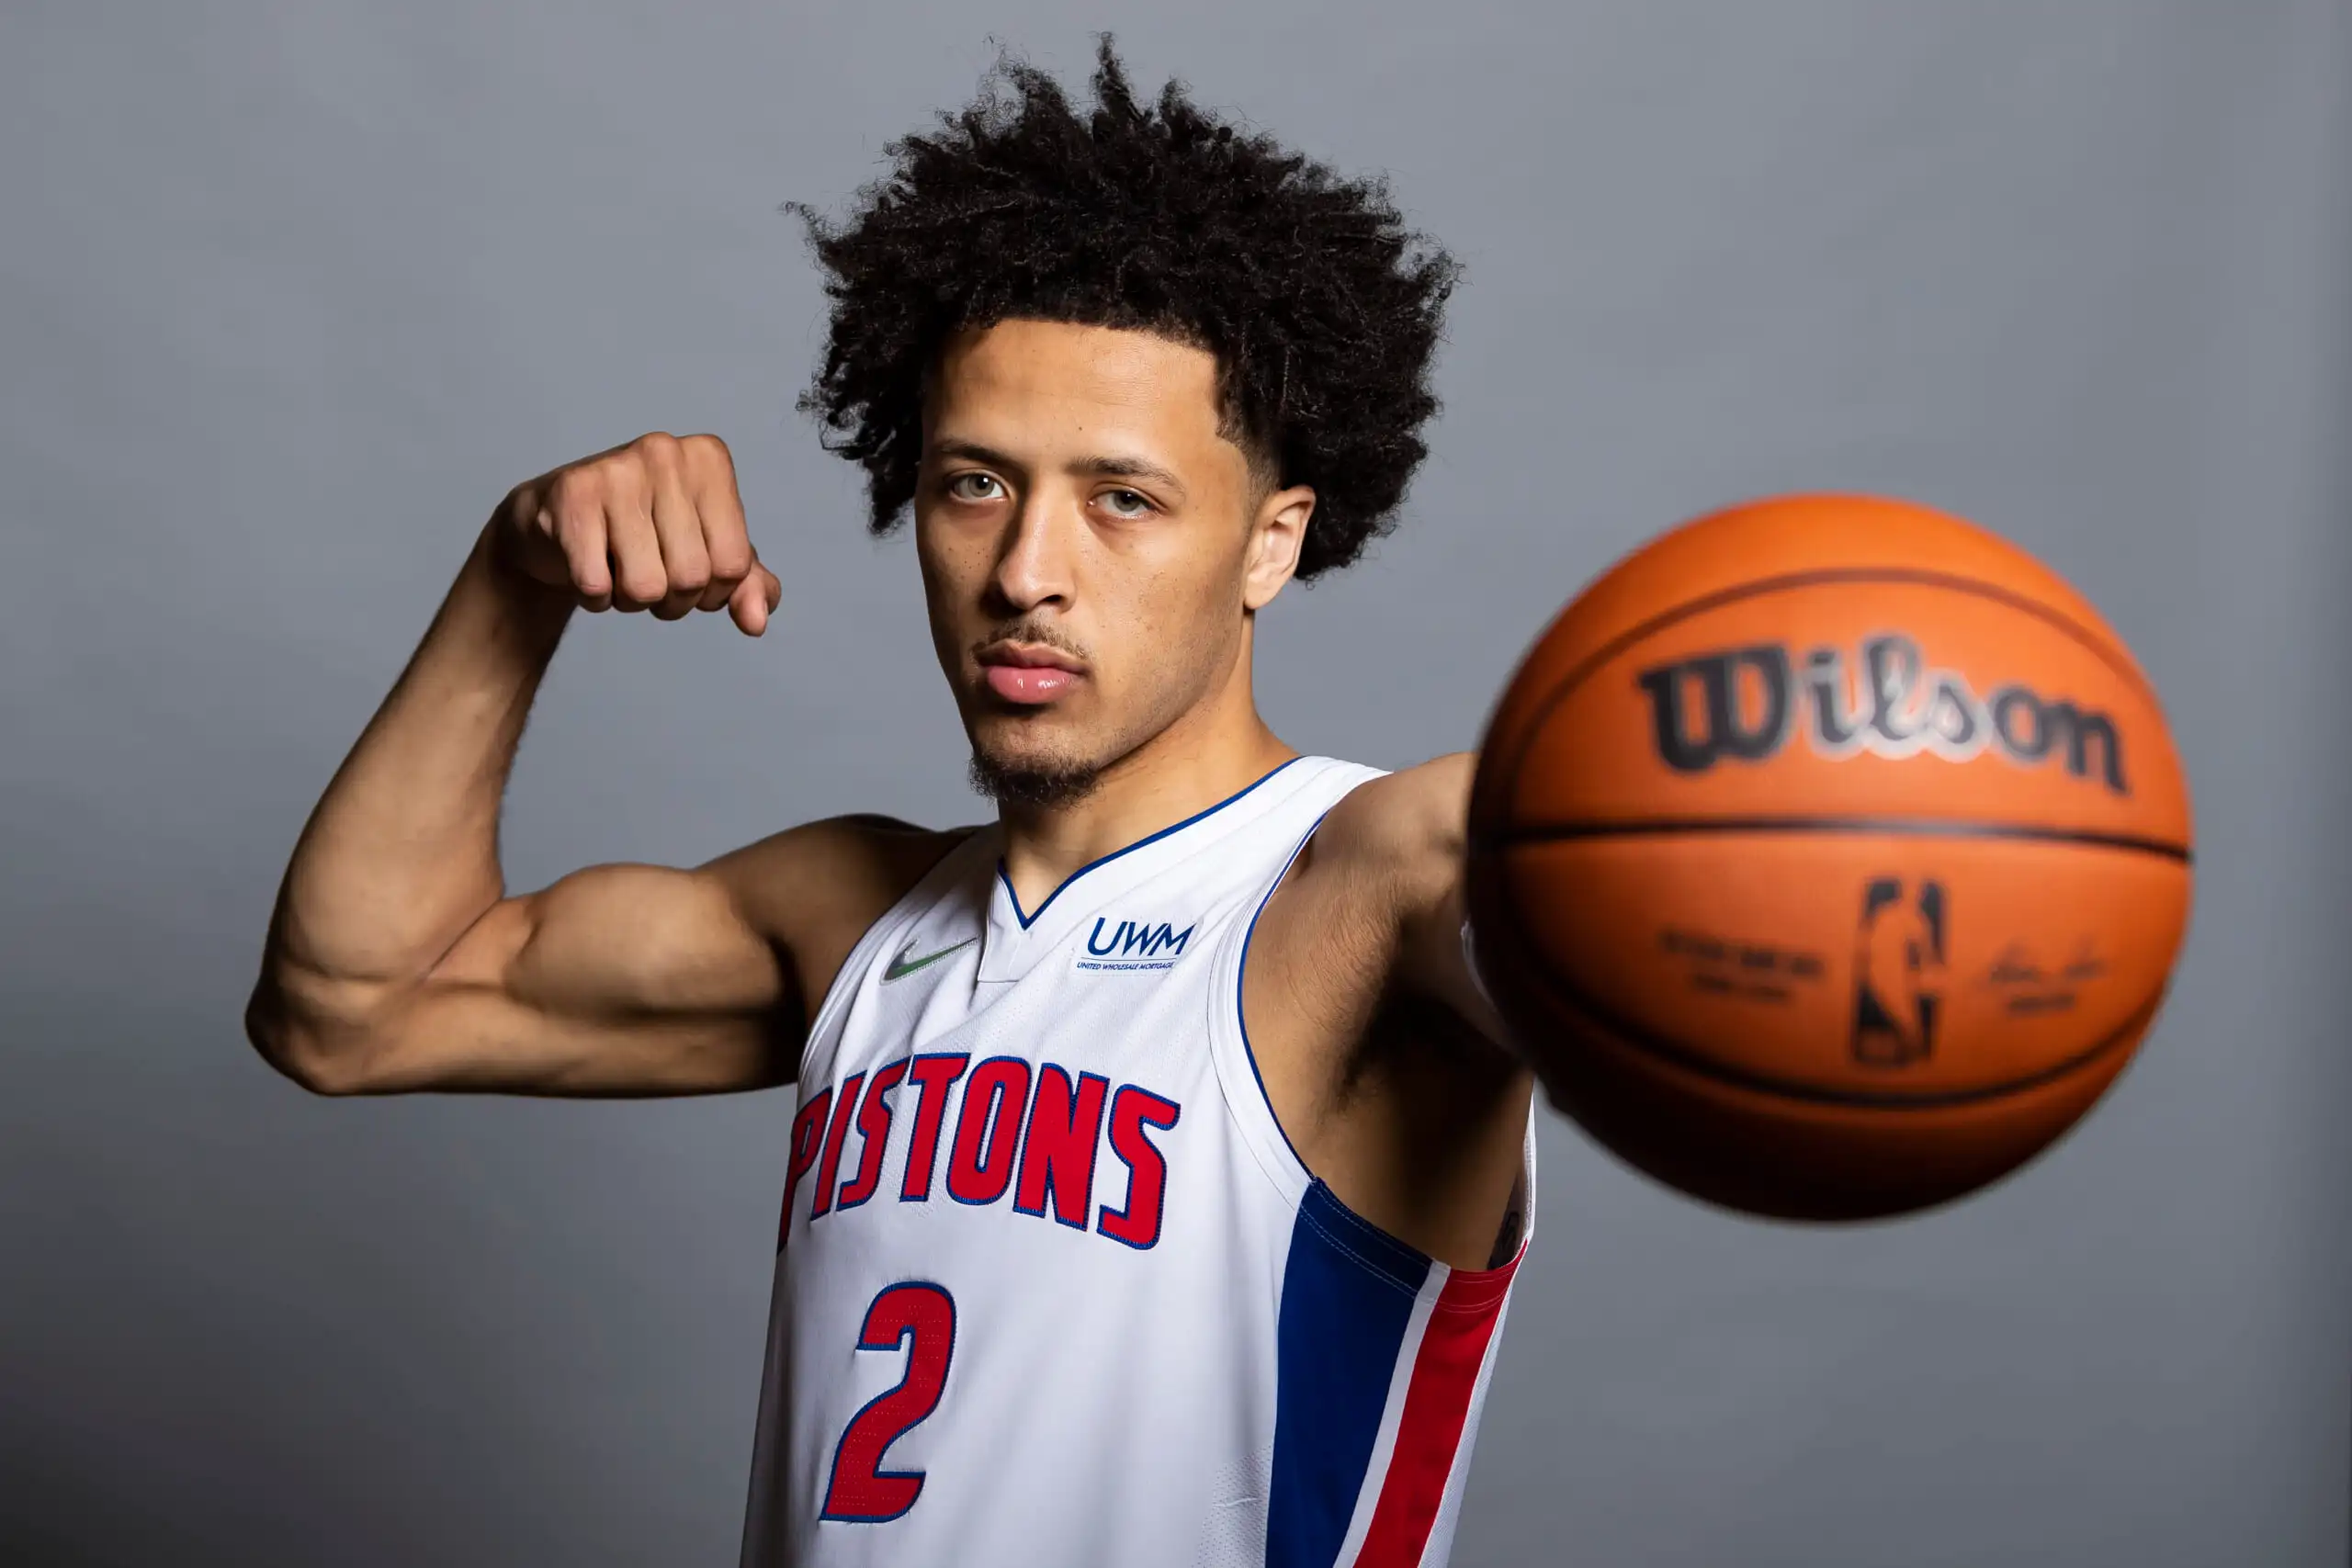 Cade Cunningham to Wear Retired No. 2 for Detroit Pistons - Pistols